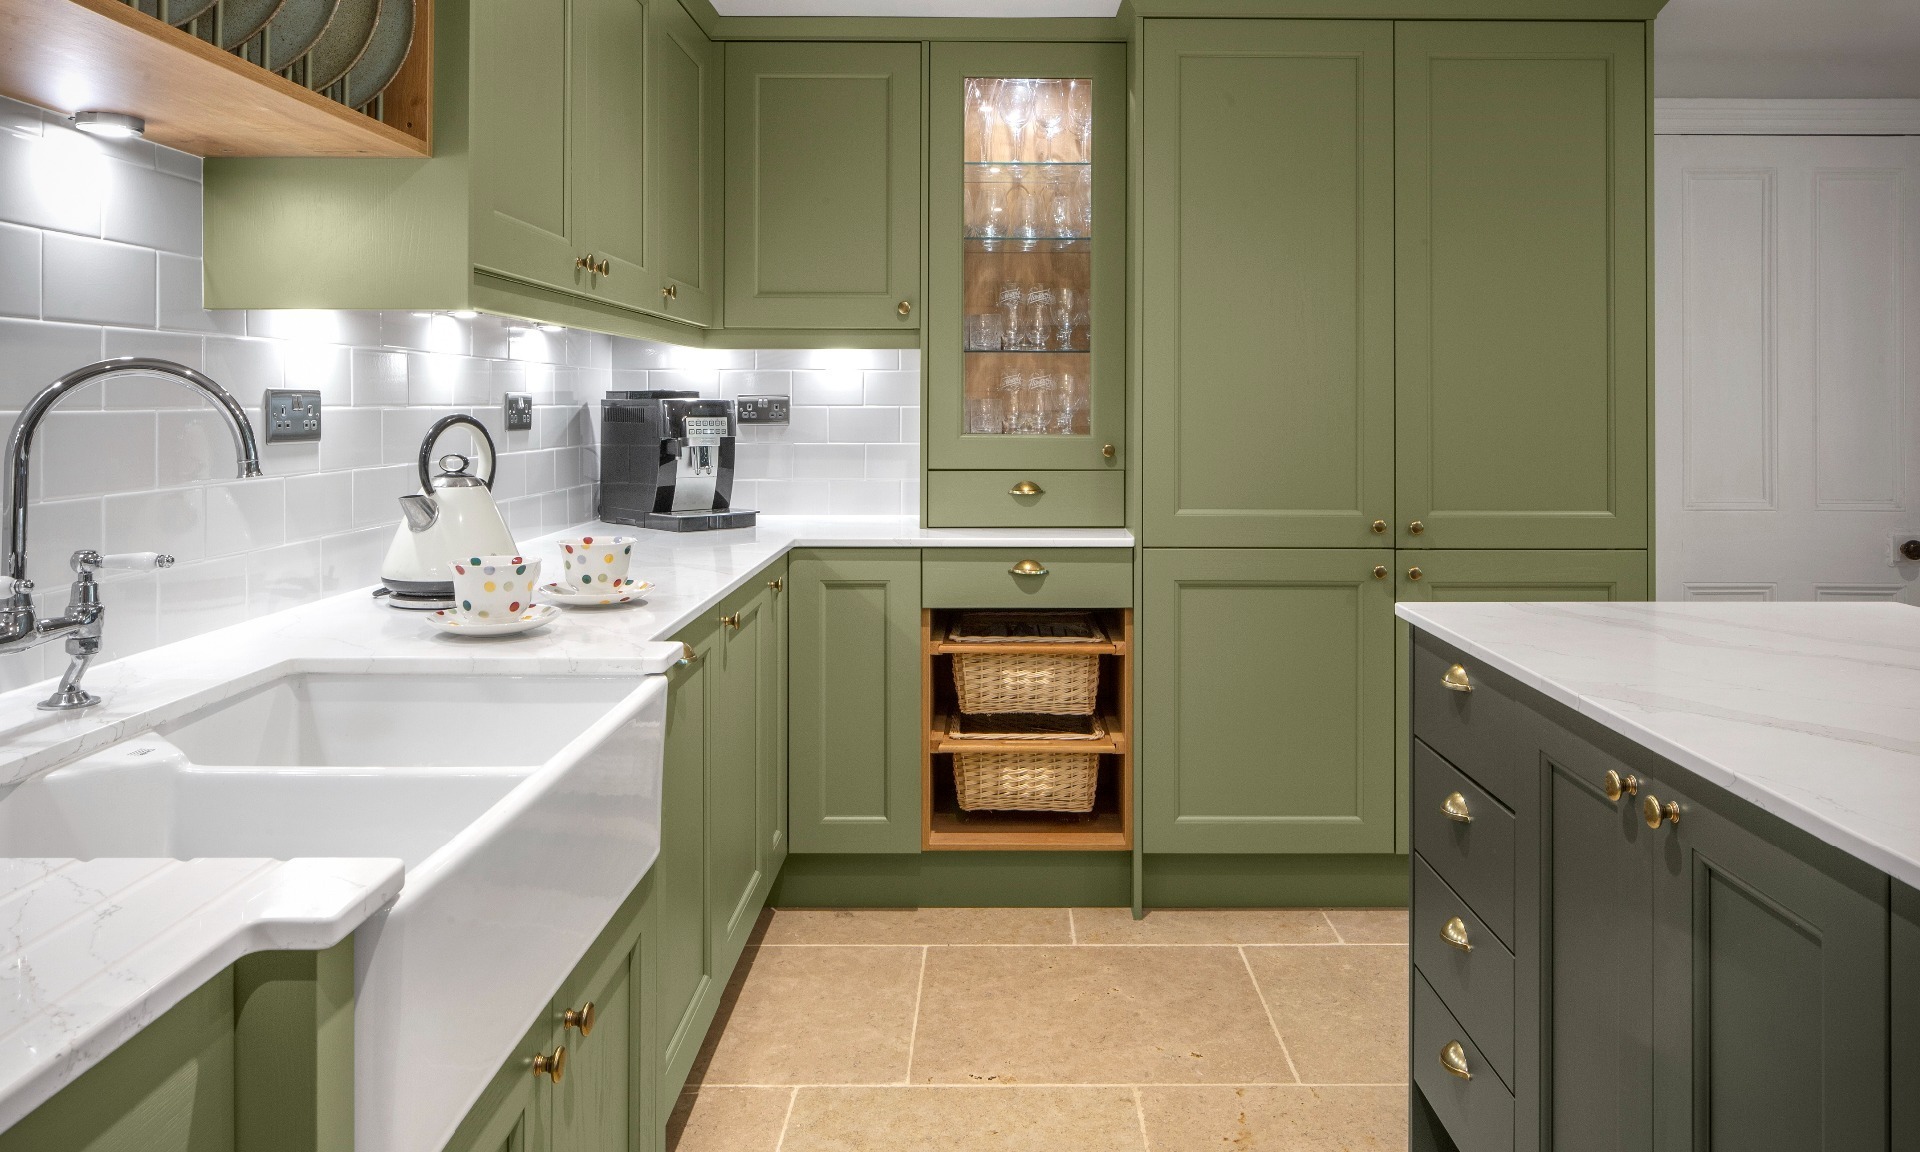 Belfast sink and shaker cabinets